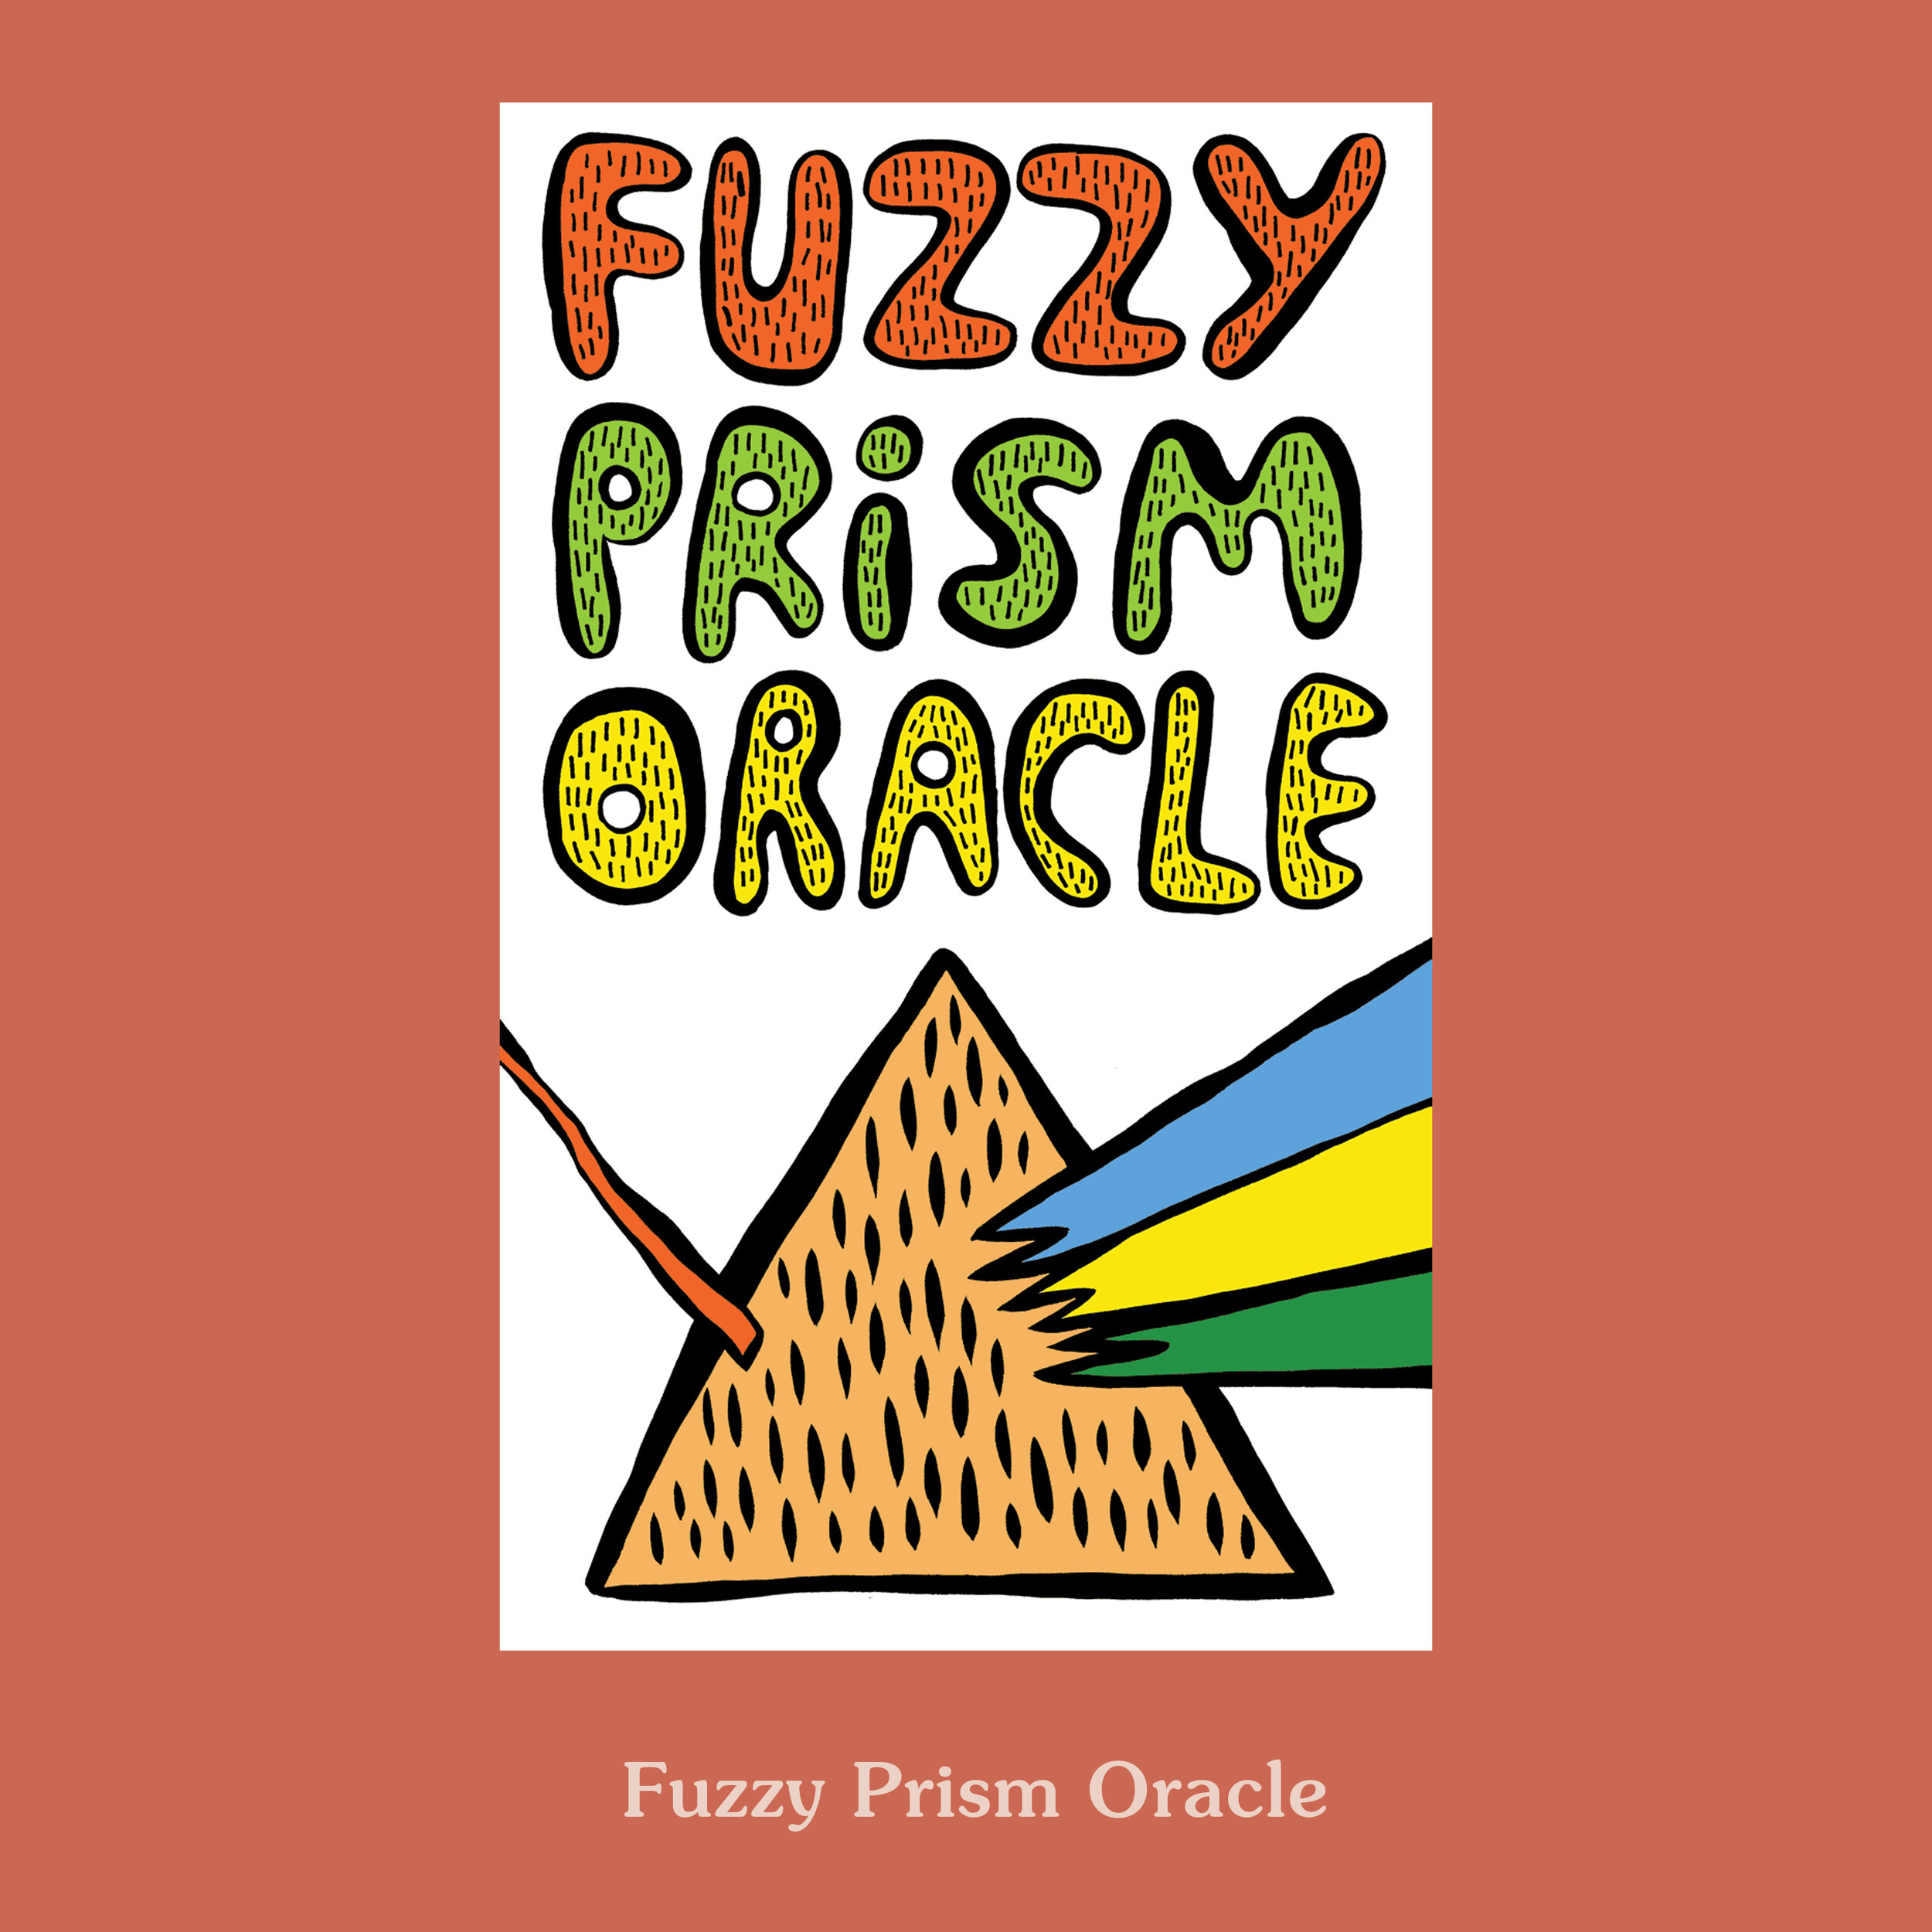 Fuzzy Prism Oracle